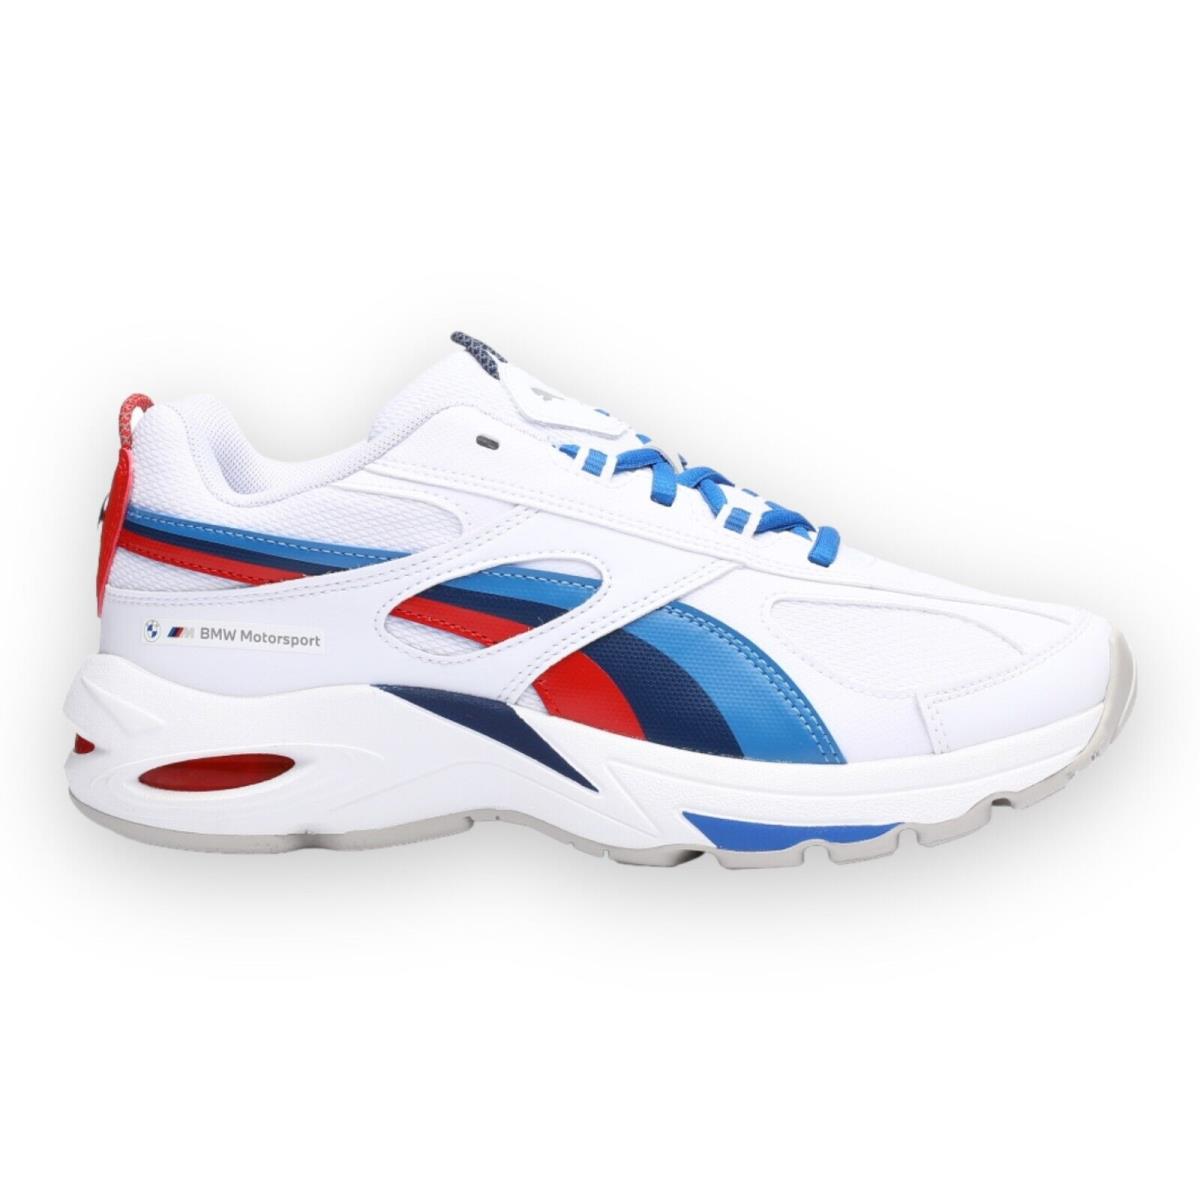 Puma Men`s Bmw M Motorsport Cell Speed Sneakers 307295 01 - WHITE/STRONG BLUE/FIERY RED